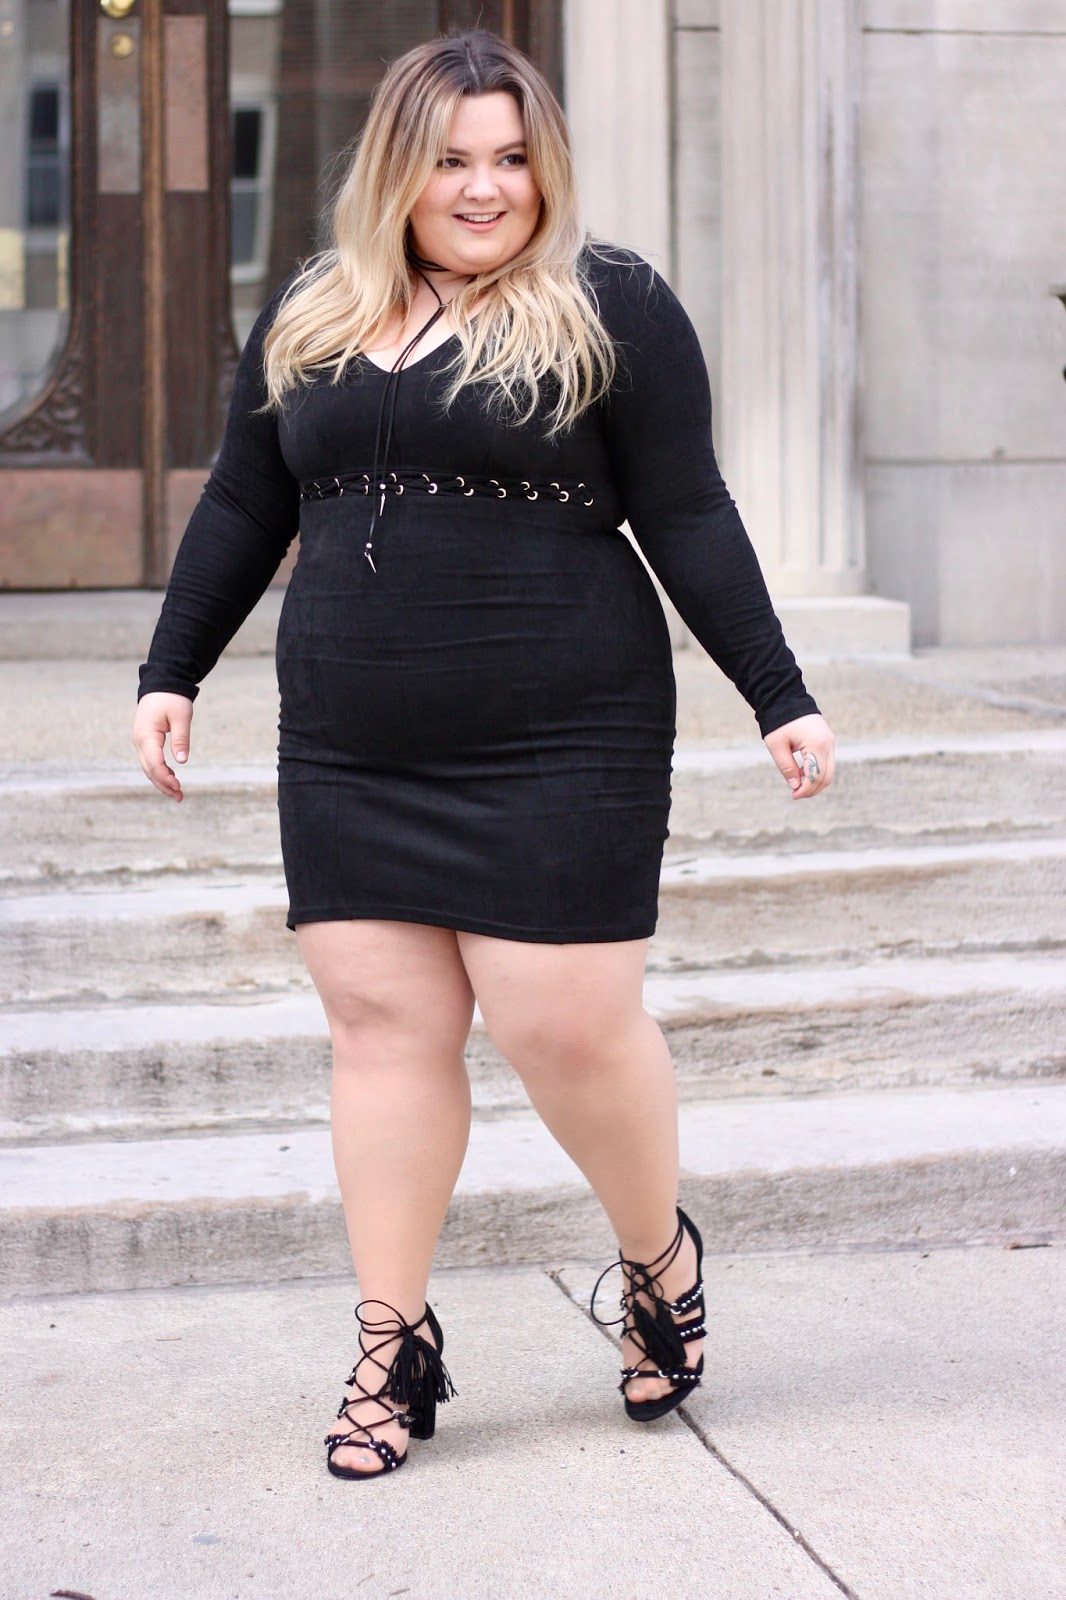 GET CURVY WITH IT — Natalie in the City